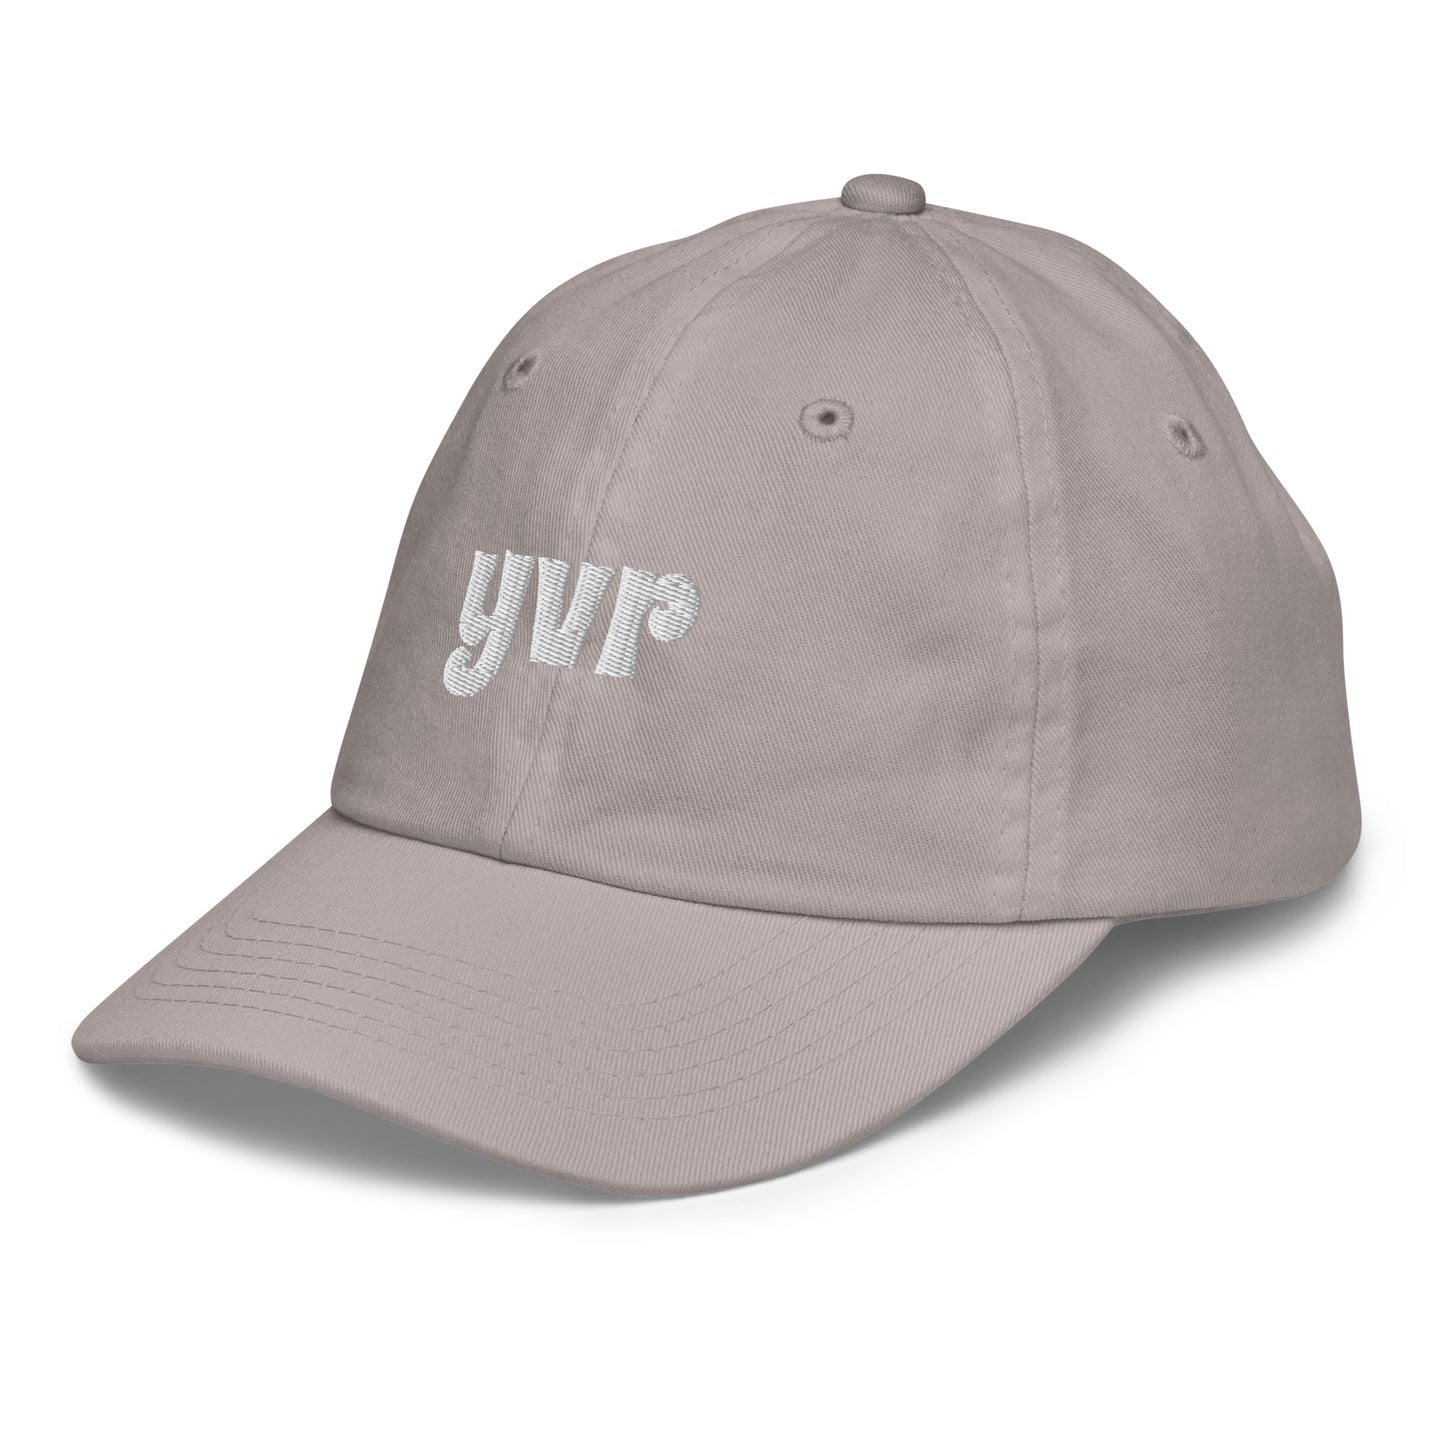 Groovy Kid's Baseball Cap - White • YVR Vancouver • YHM Designs - Image 20